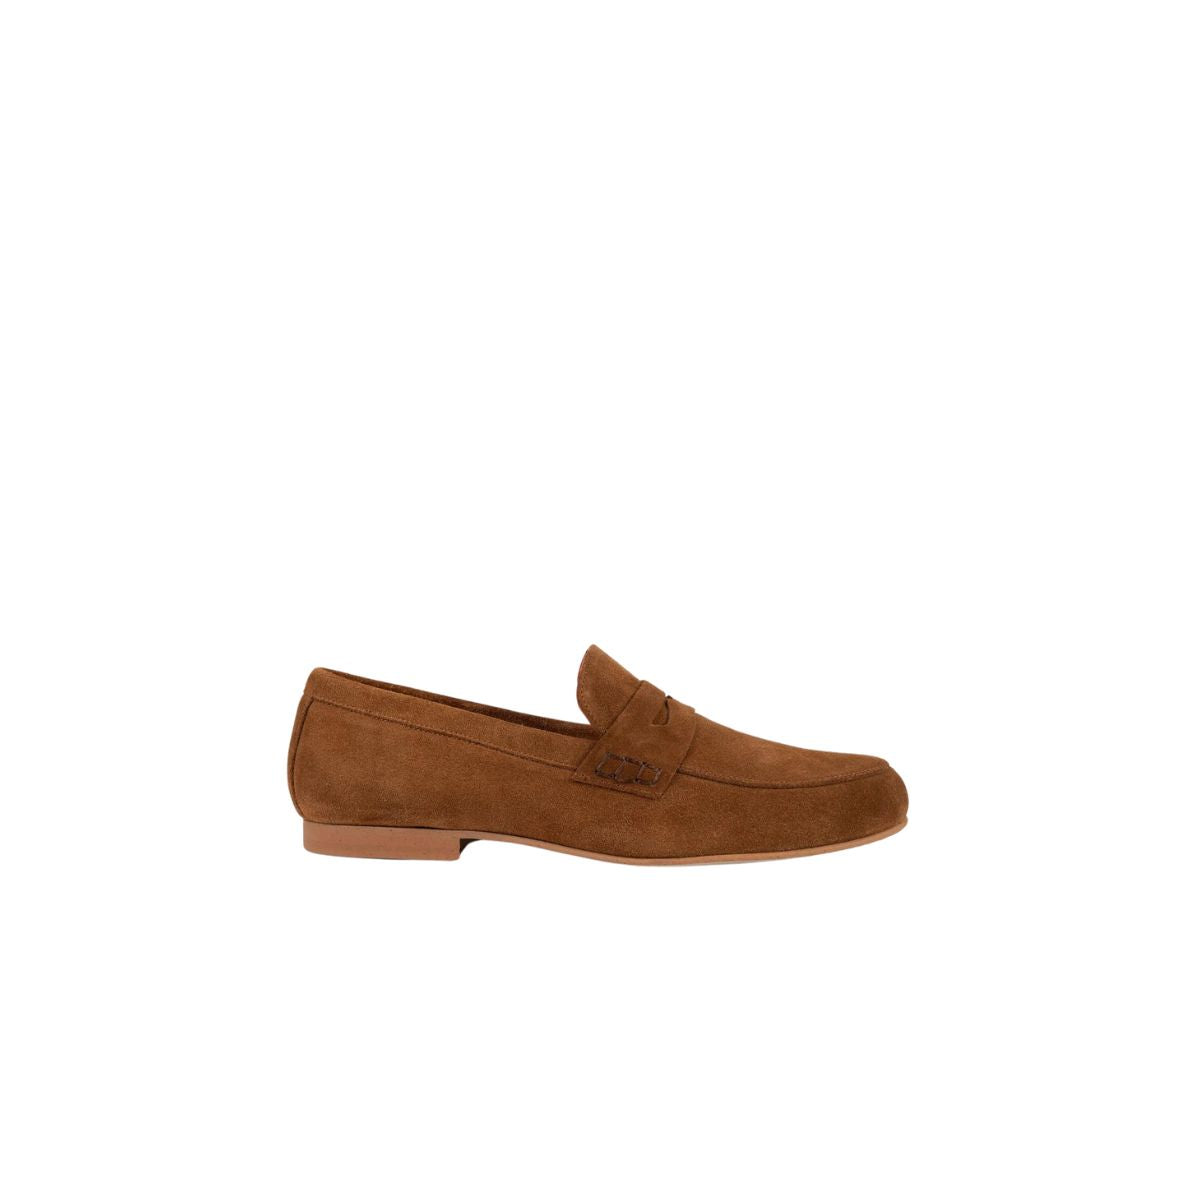 Penelope Chilvers Bonnie Suede Loafer in Tan